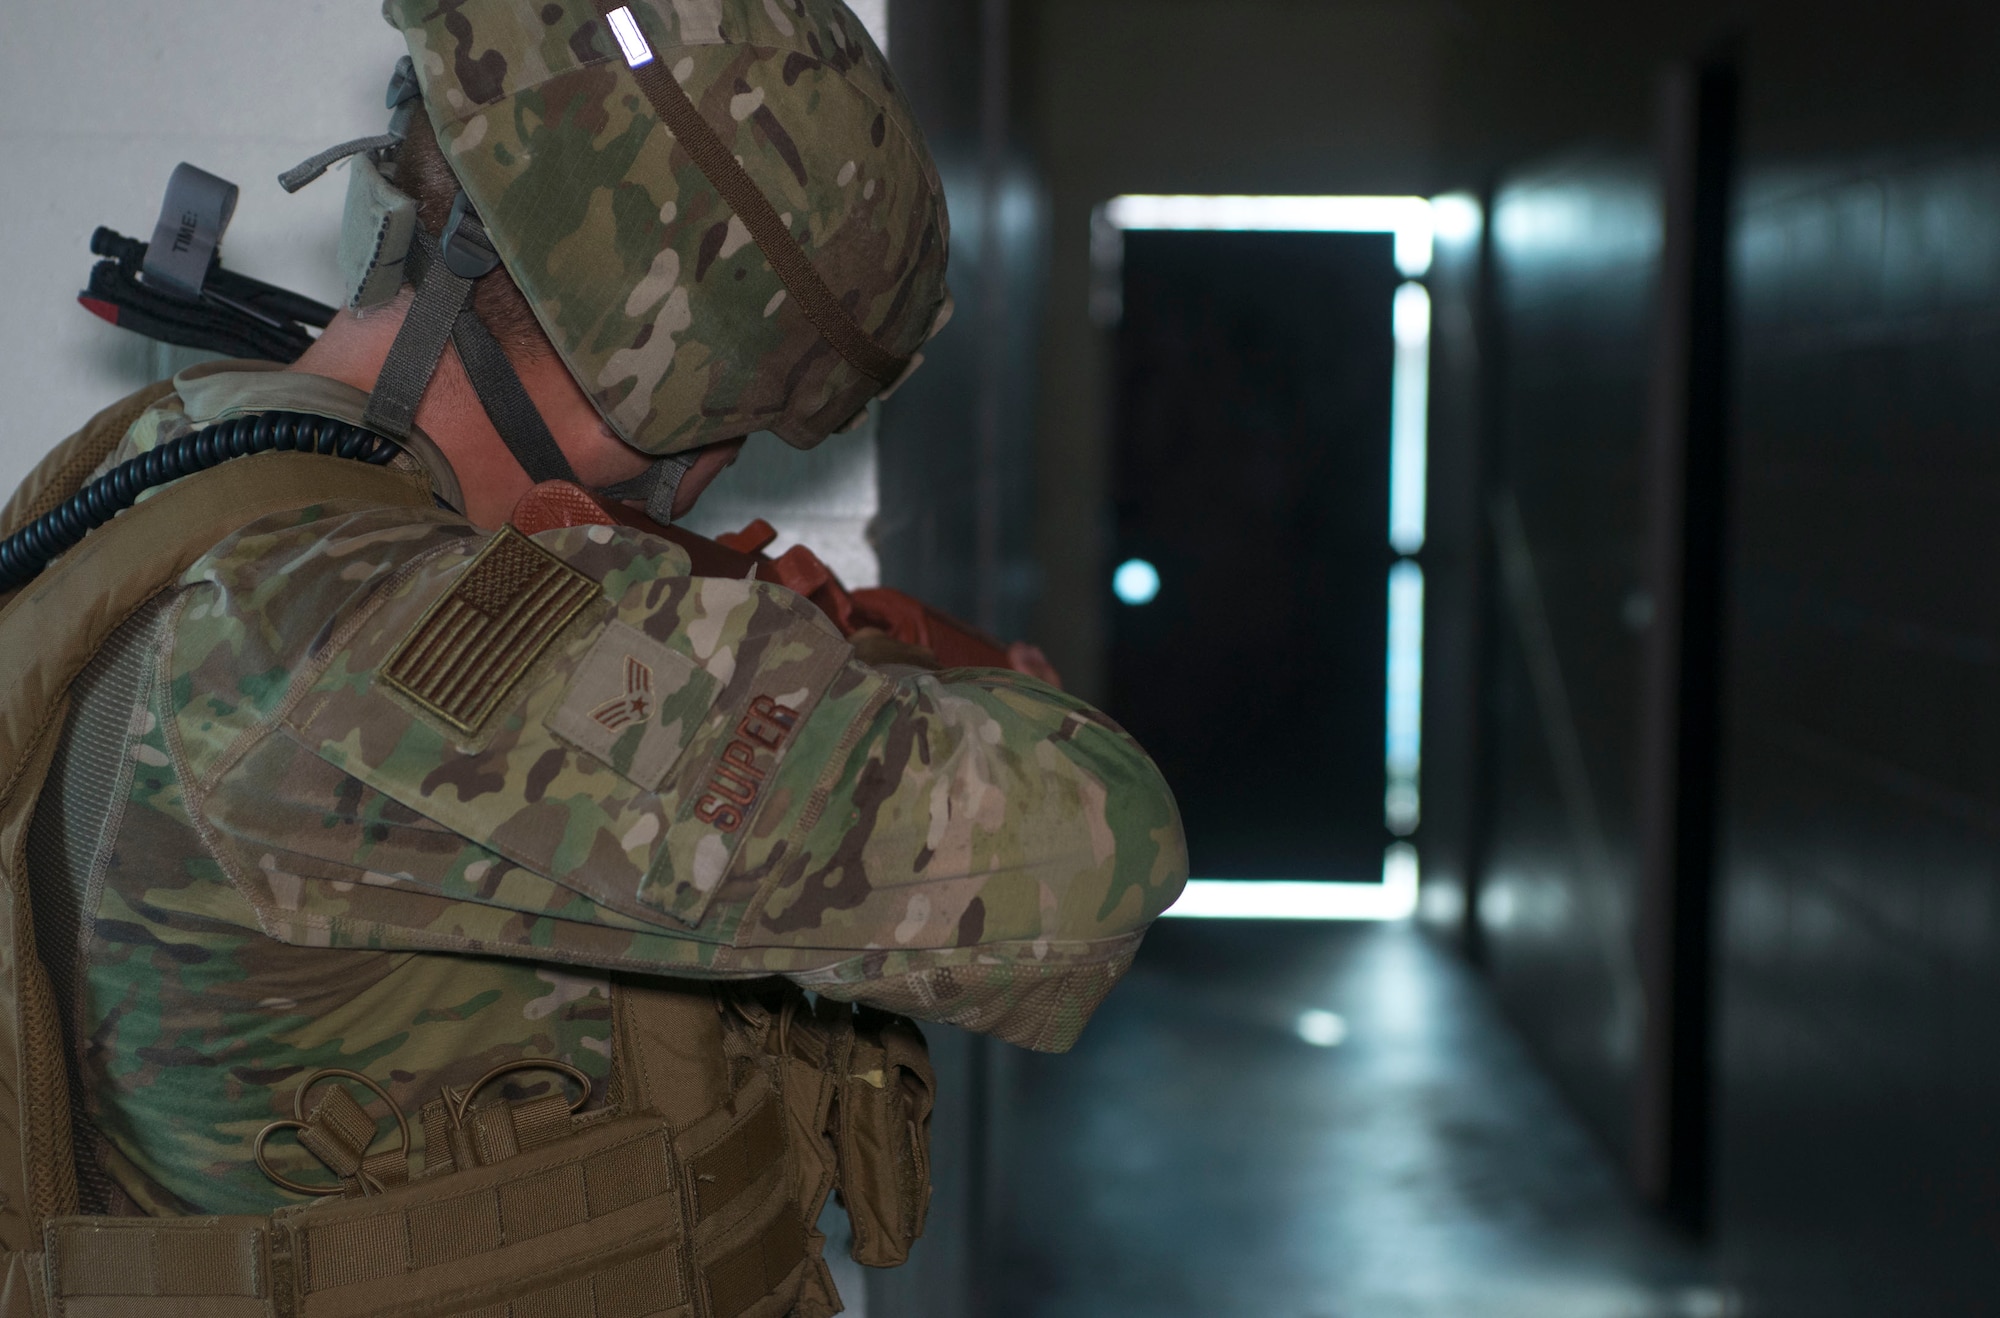 U.S. Air Force Senior Airman Weston Super, a 6th Security Forces Squadron entry controller, aims his training weapon down a hallway during an active shooter exercise at MacDill Air Force Base, Fla., Aug. 8, 2019.